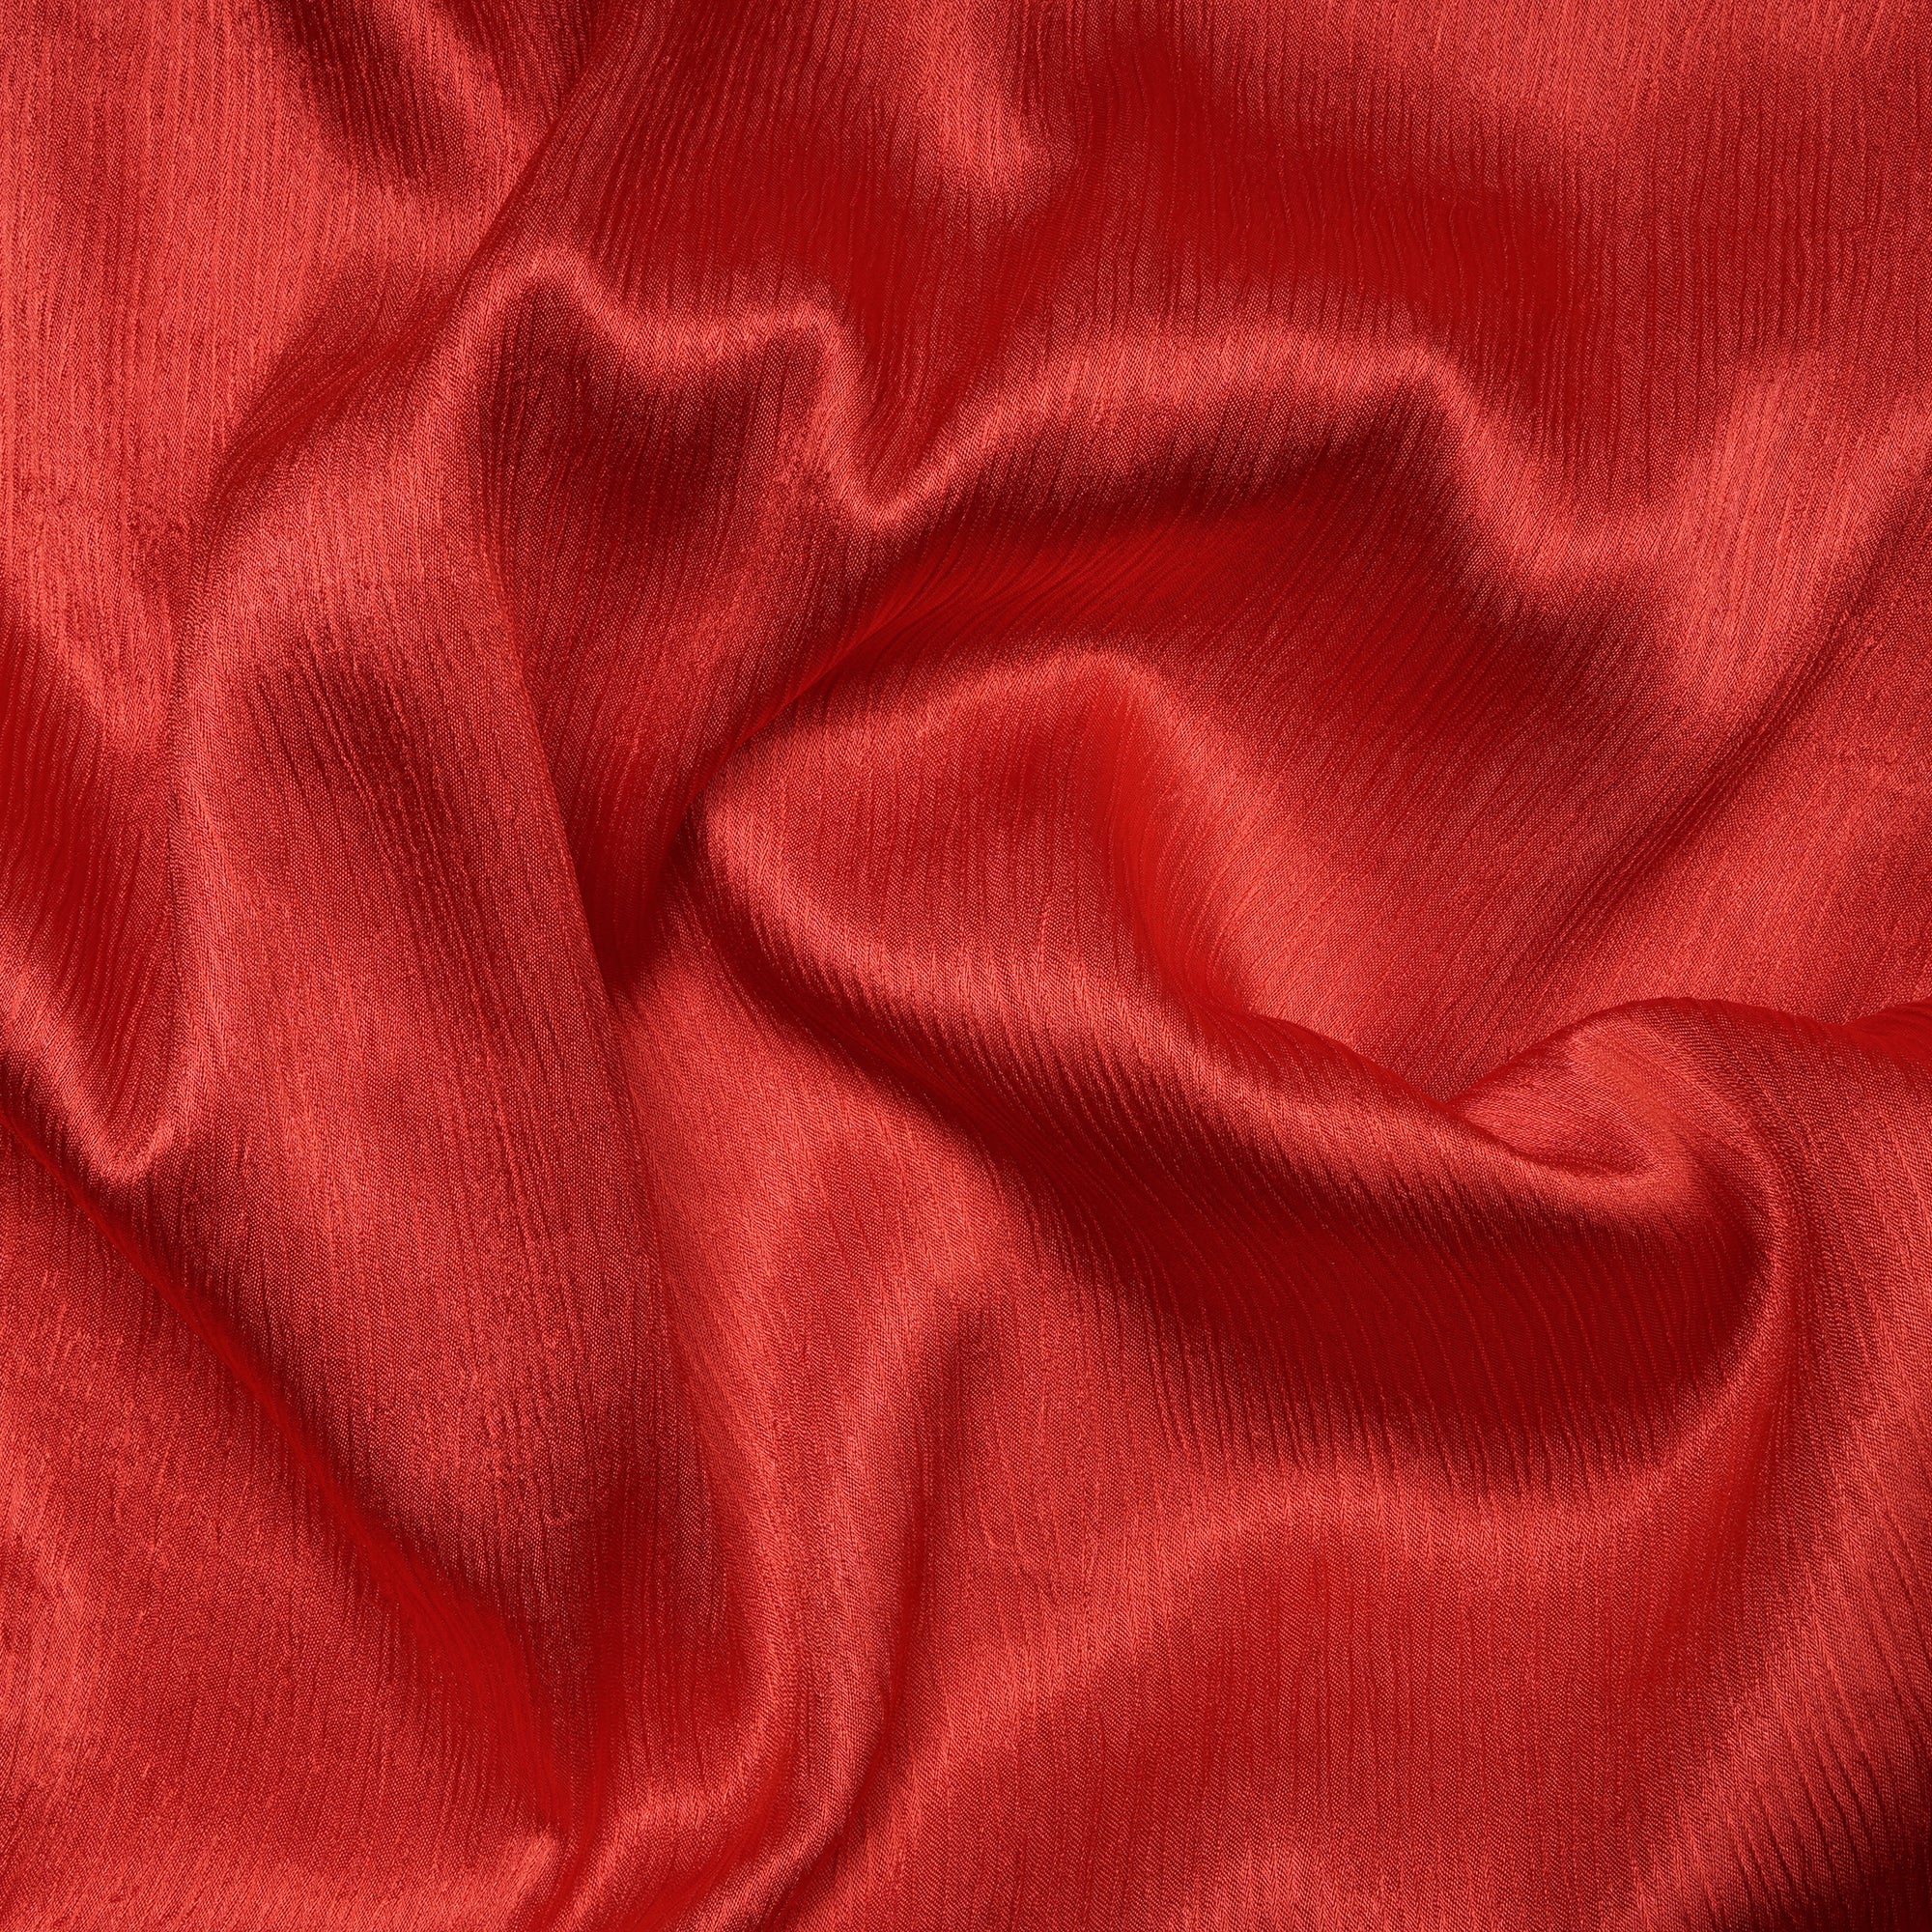 Red Imported Crinkled Satin Fabric (60" Wide)